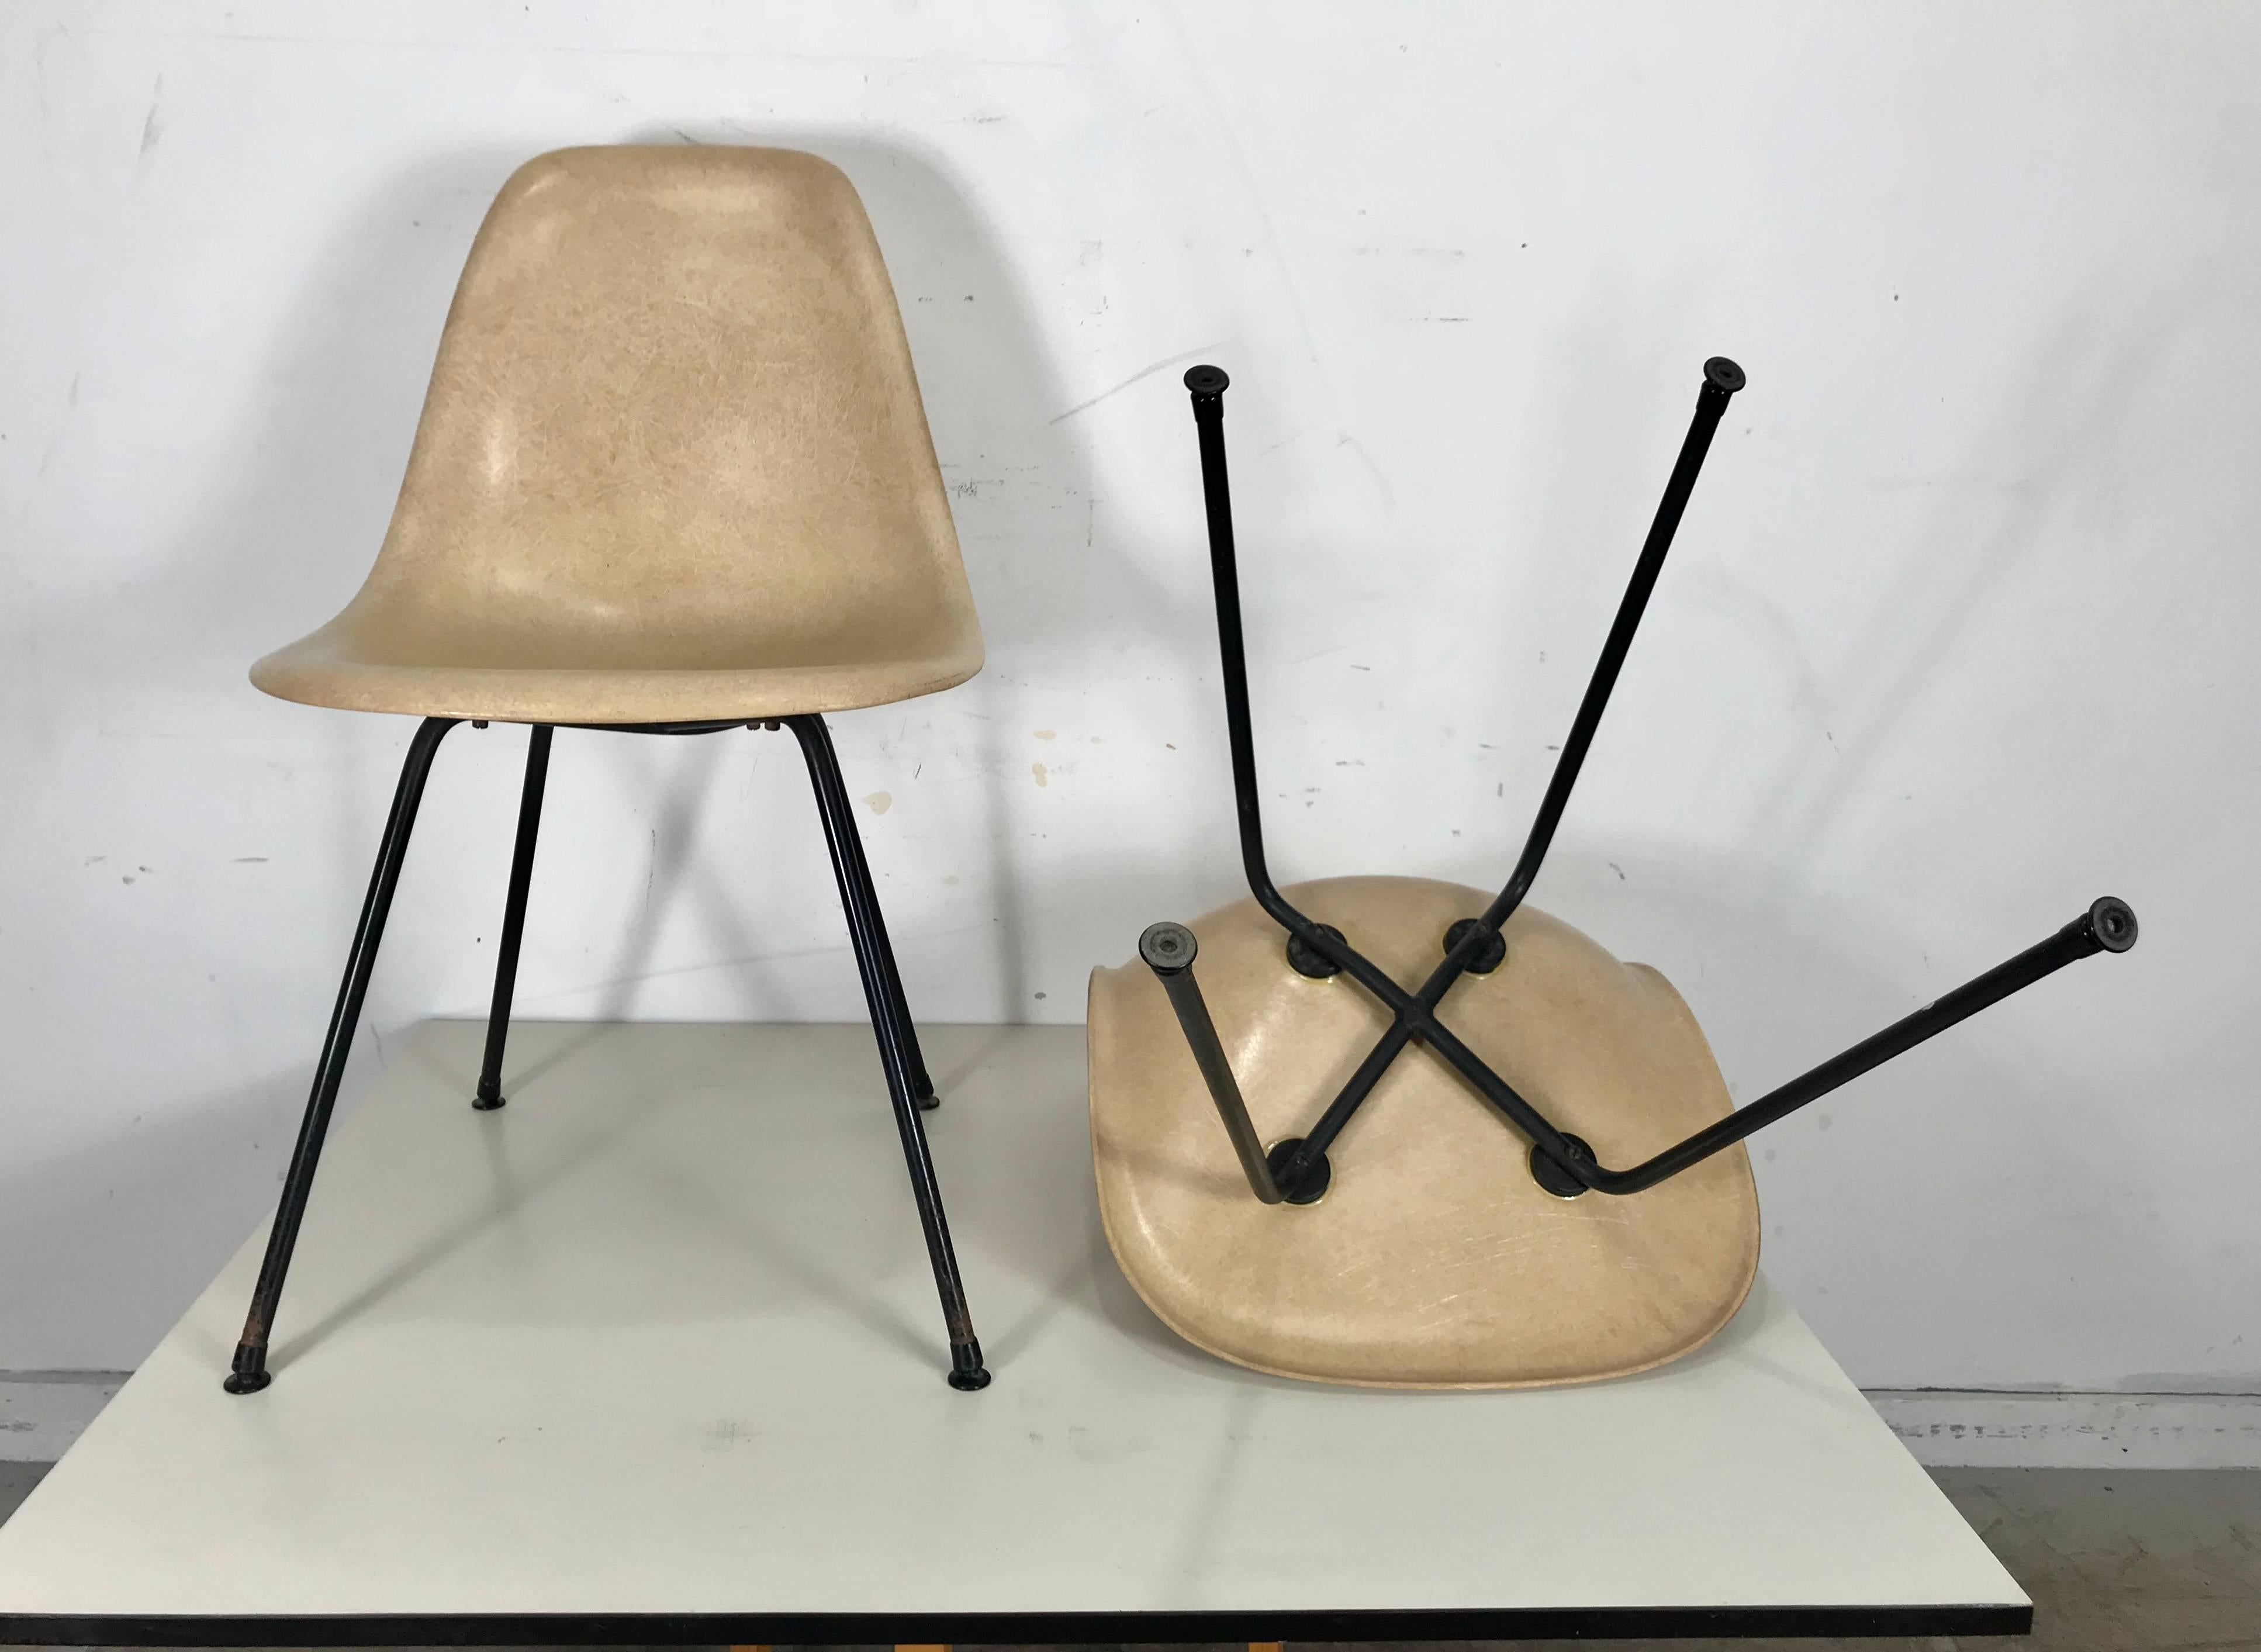 Extremely rare Mid-Century Modern side shell chairs designed by Charles and Ray Eames manufactured by Herman Miller, I believe these to be first year production circa 1950. Matched set of ten featuring translucent, see through parchment fiberglass